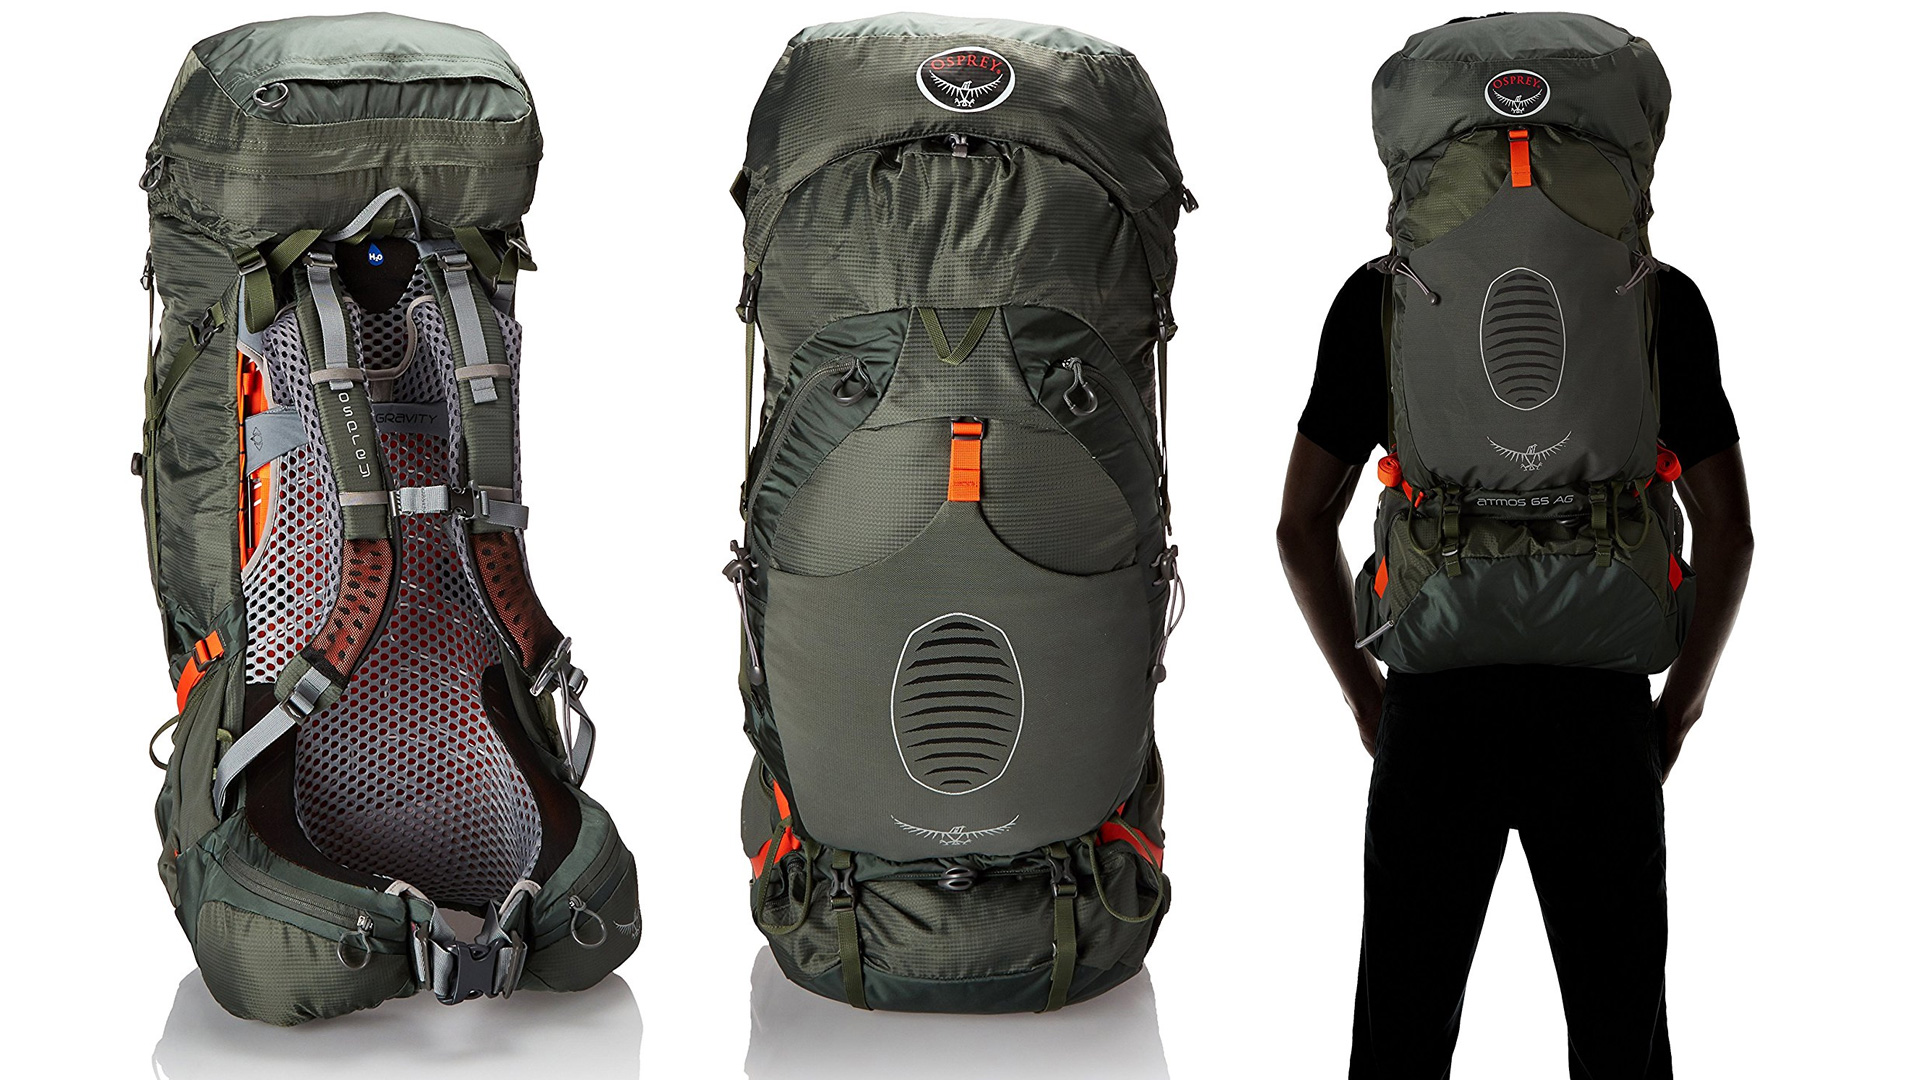 Carry it all in Osprey's Atmos AG 65 Pack for $180 (Reg. $260+)